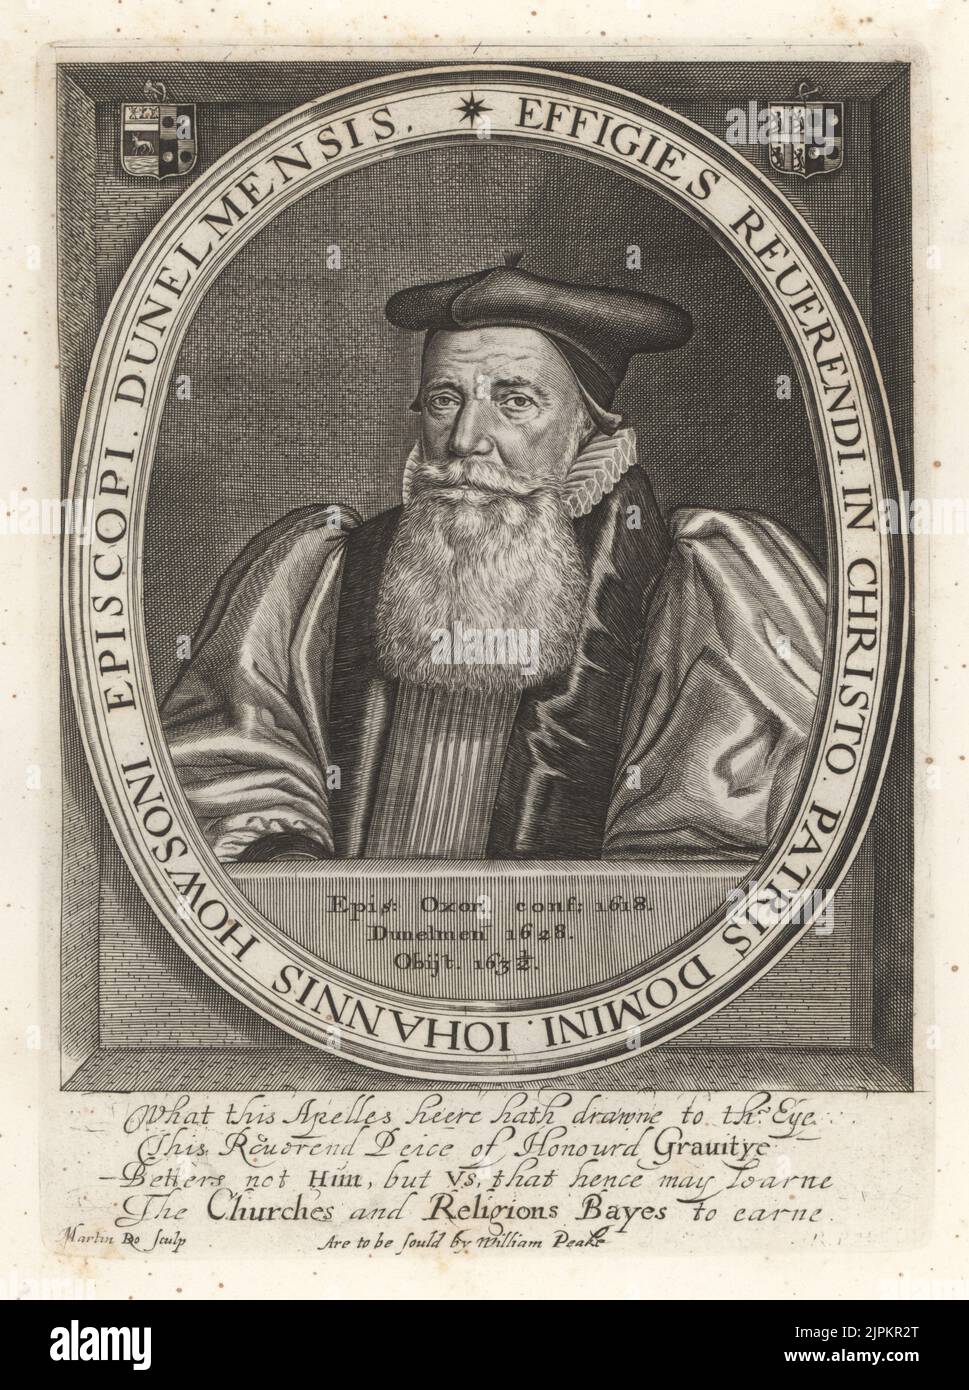 John Howson, English academic and ecclesiastic, Bishop of Durham, c.1557-1632. In cap, full beard, ruff collar, velvet robes. With coat of arms. Johannis Howsoni Episcopi Dunelmensis. After an original plate by Martin Droeshout, sold by William Peake. Copperplate engraving from Samuel Woodburn’s Gallery of Rare Portraits Consisting of Original Plates, George Jones, 102 St Martin’s Lane, London, 1816. Stock Photo